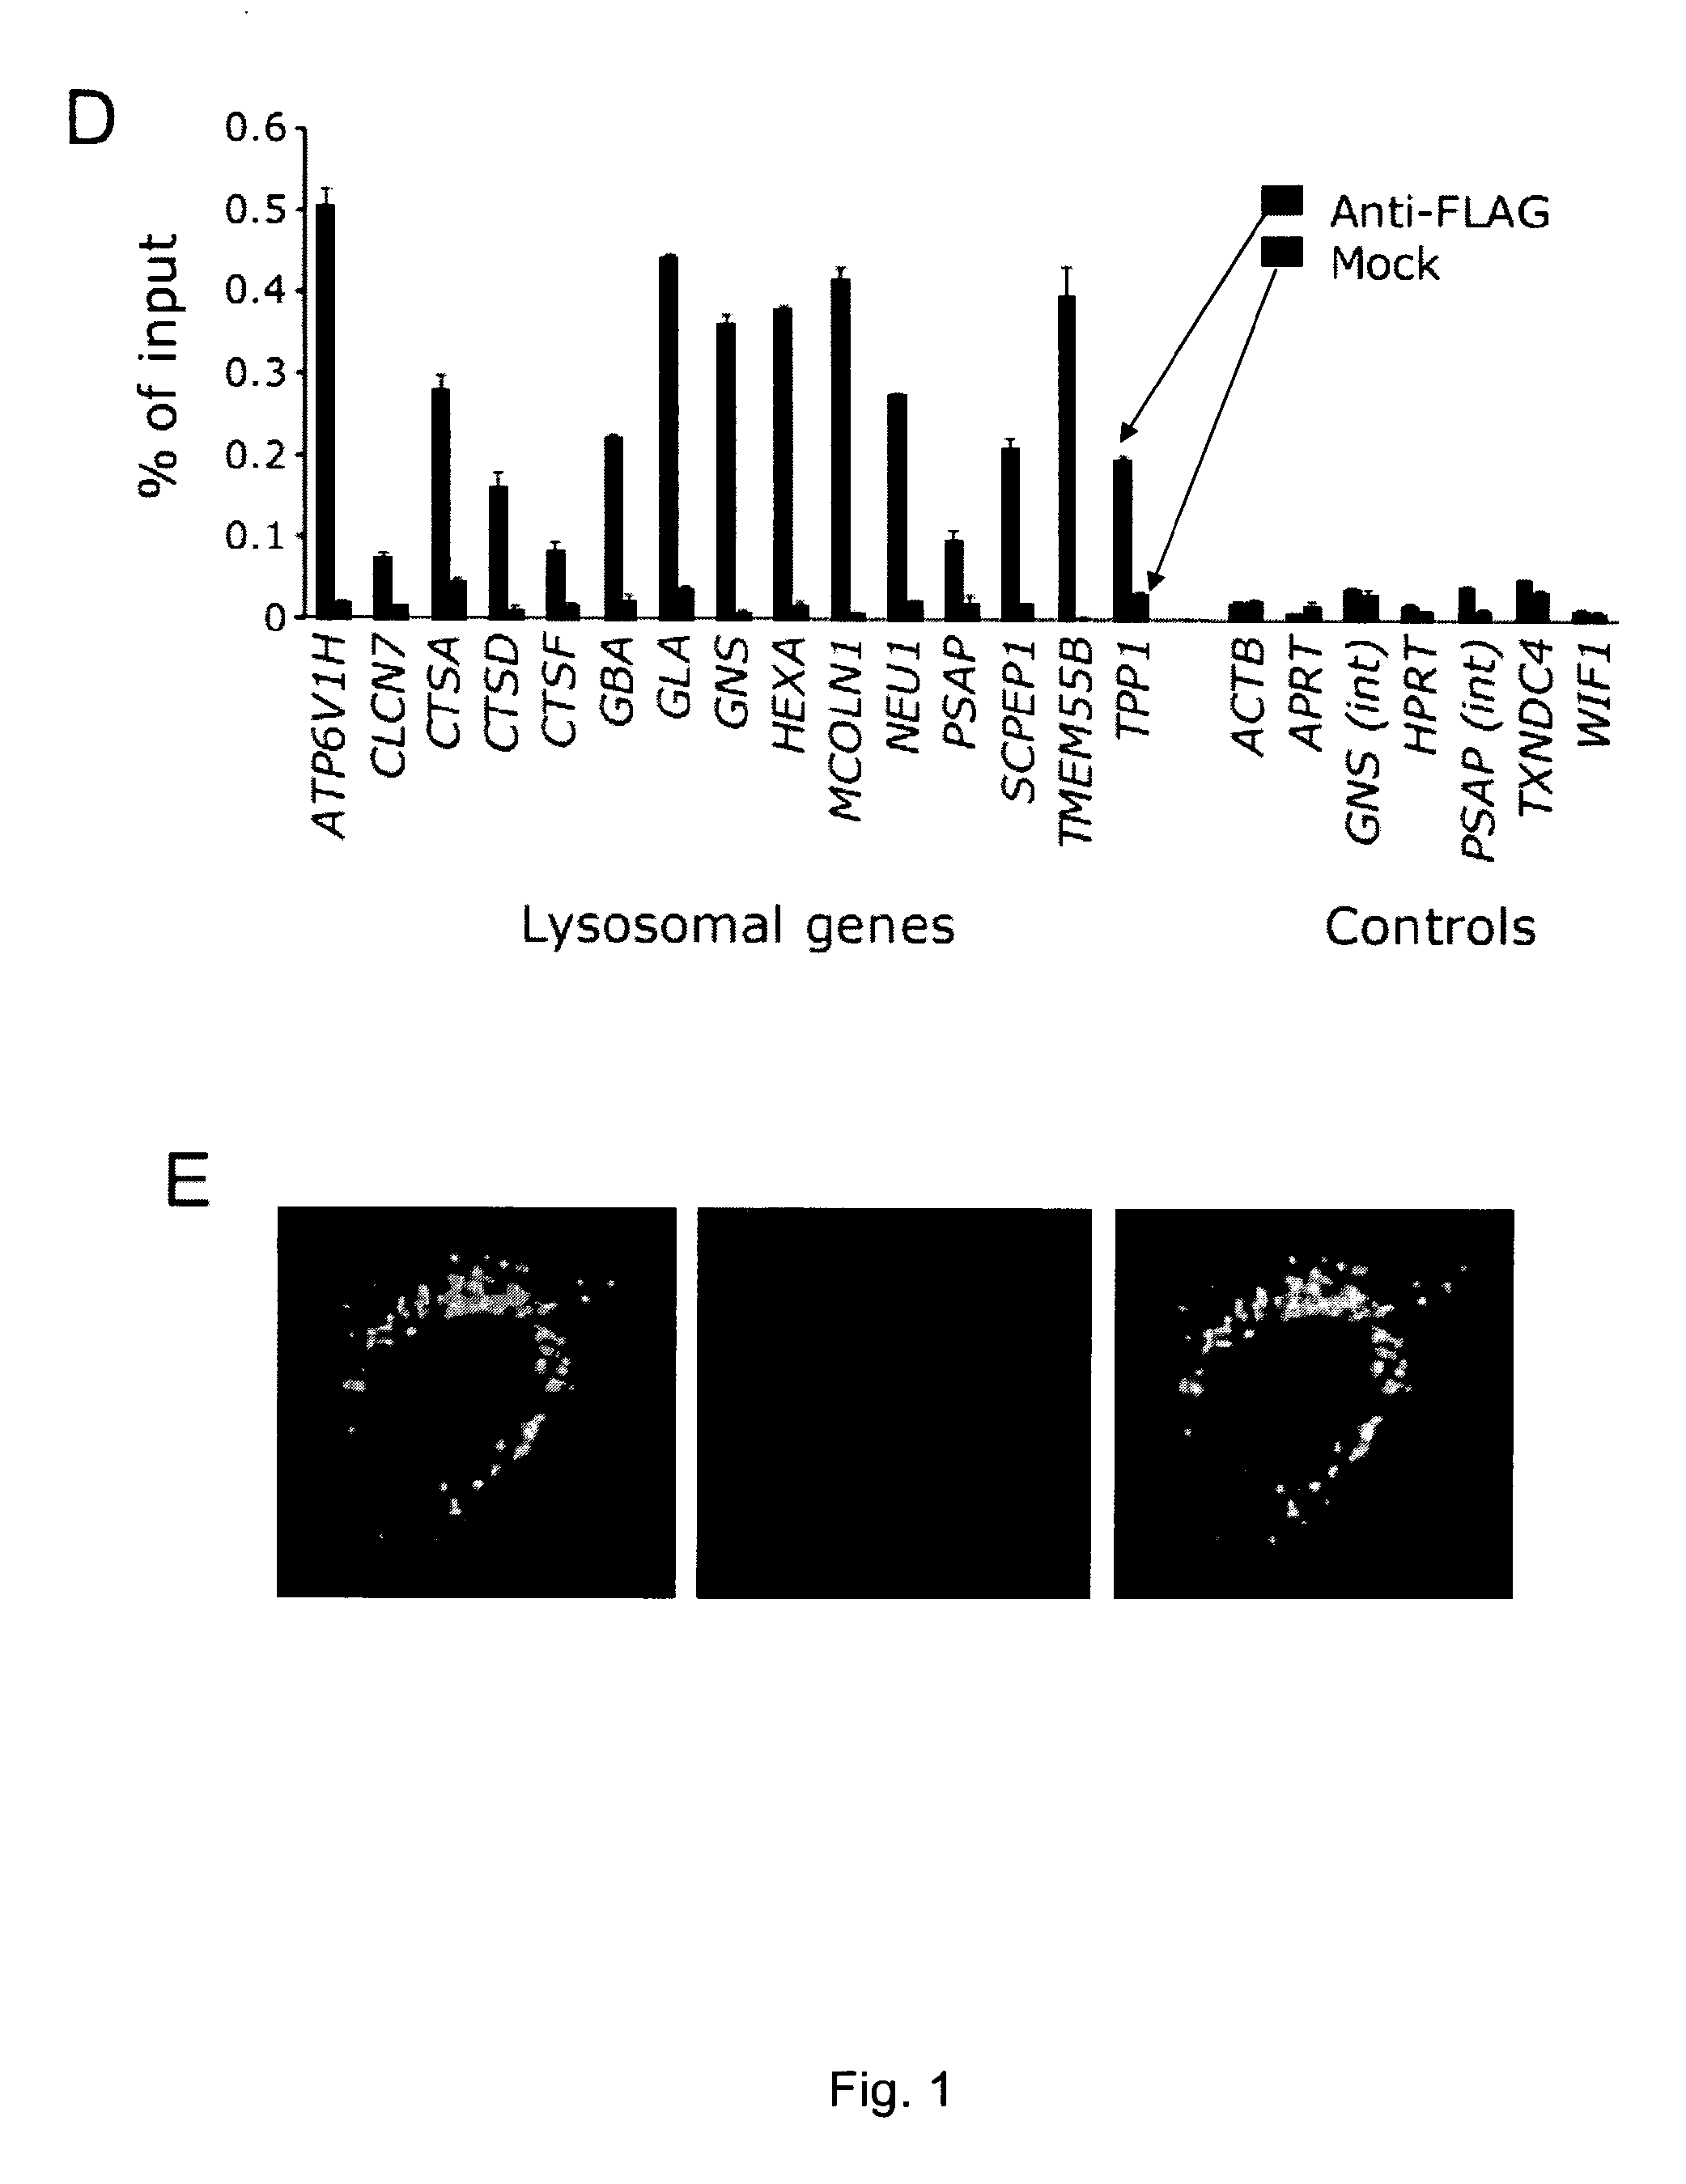 Molecules able to modulate the expression of at least a gene involved in degradative pathways and uses thereof